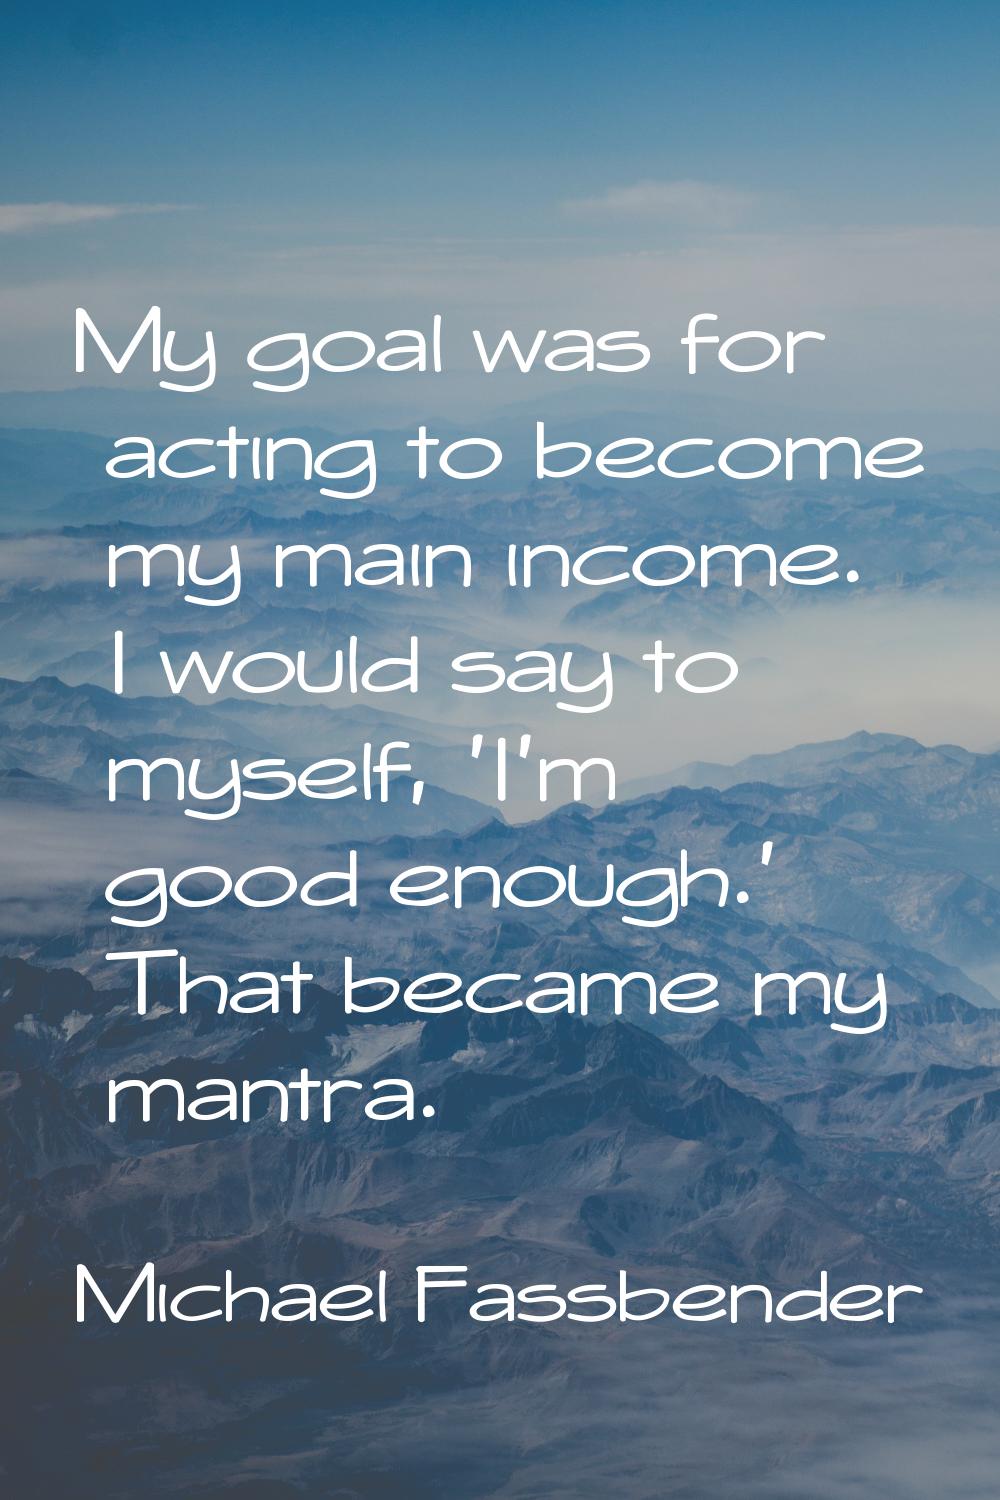 My goal was for acting to become my main income. I would say to myself, 'I'm good enough.' That bec